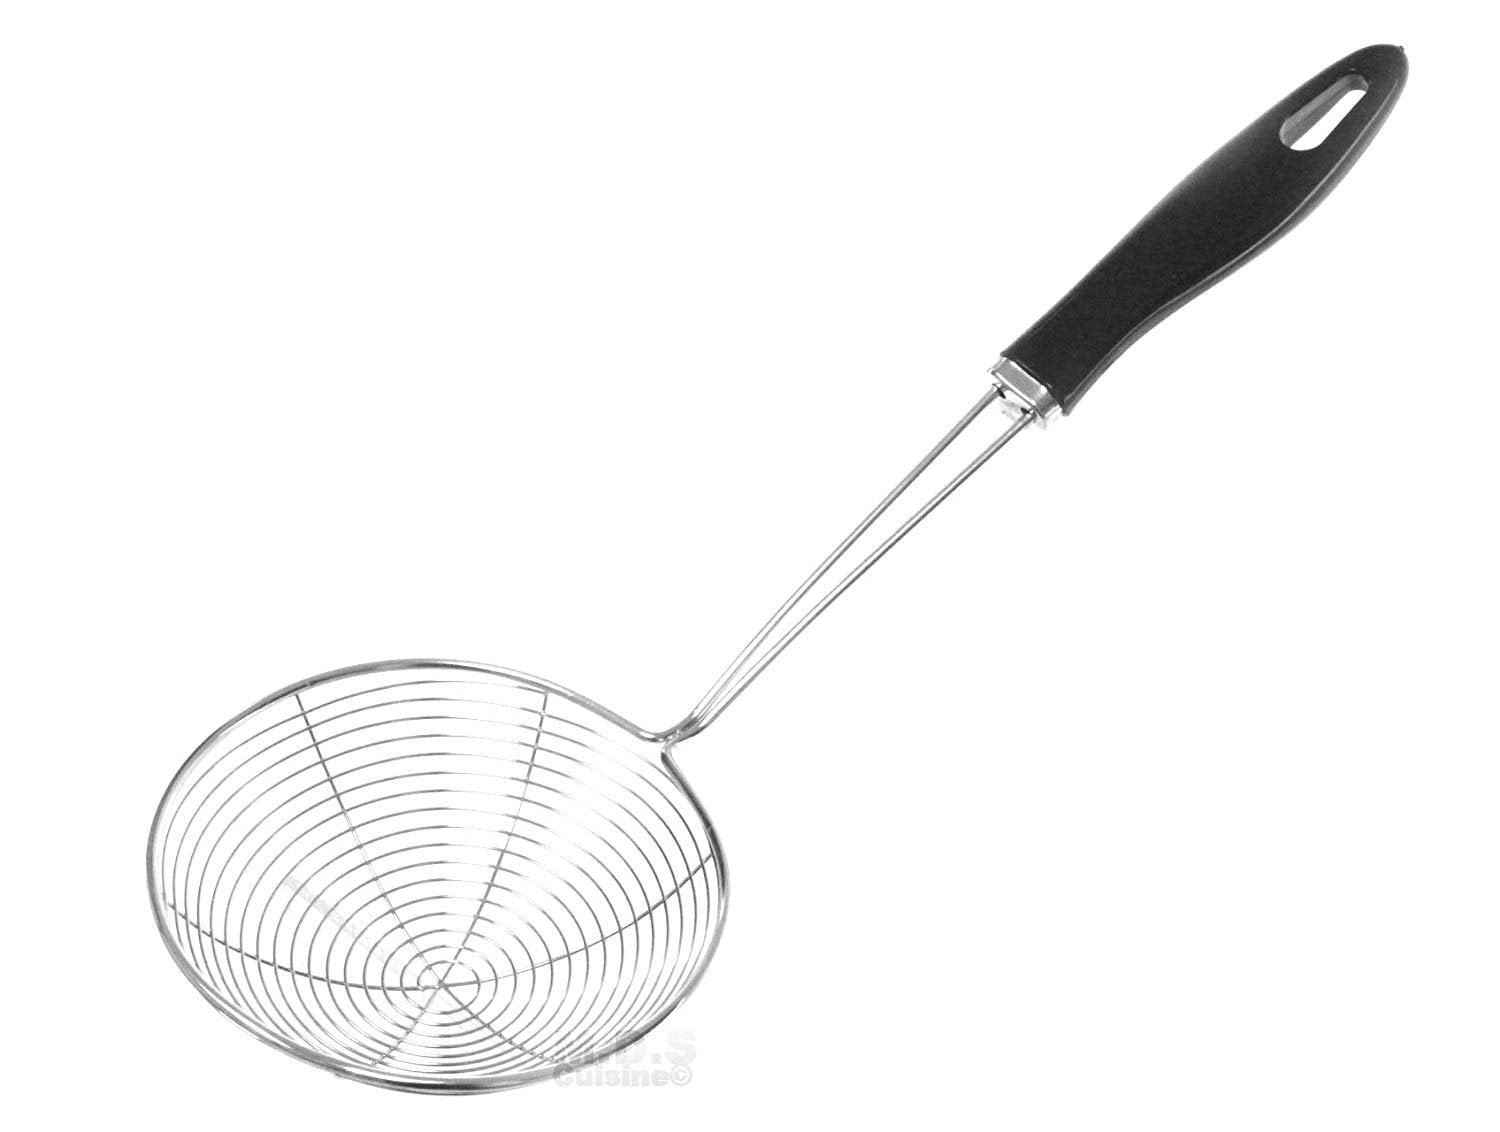 Nigoz Strainer Skimmer Stainless Steel Spider Strainer Ladle for Pasta Spaghetti Noodles and Frying in Kitchen 12 Inches Bowl Creative and Exquisite Workmanship Top Quality